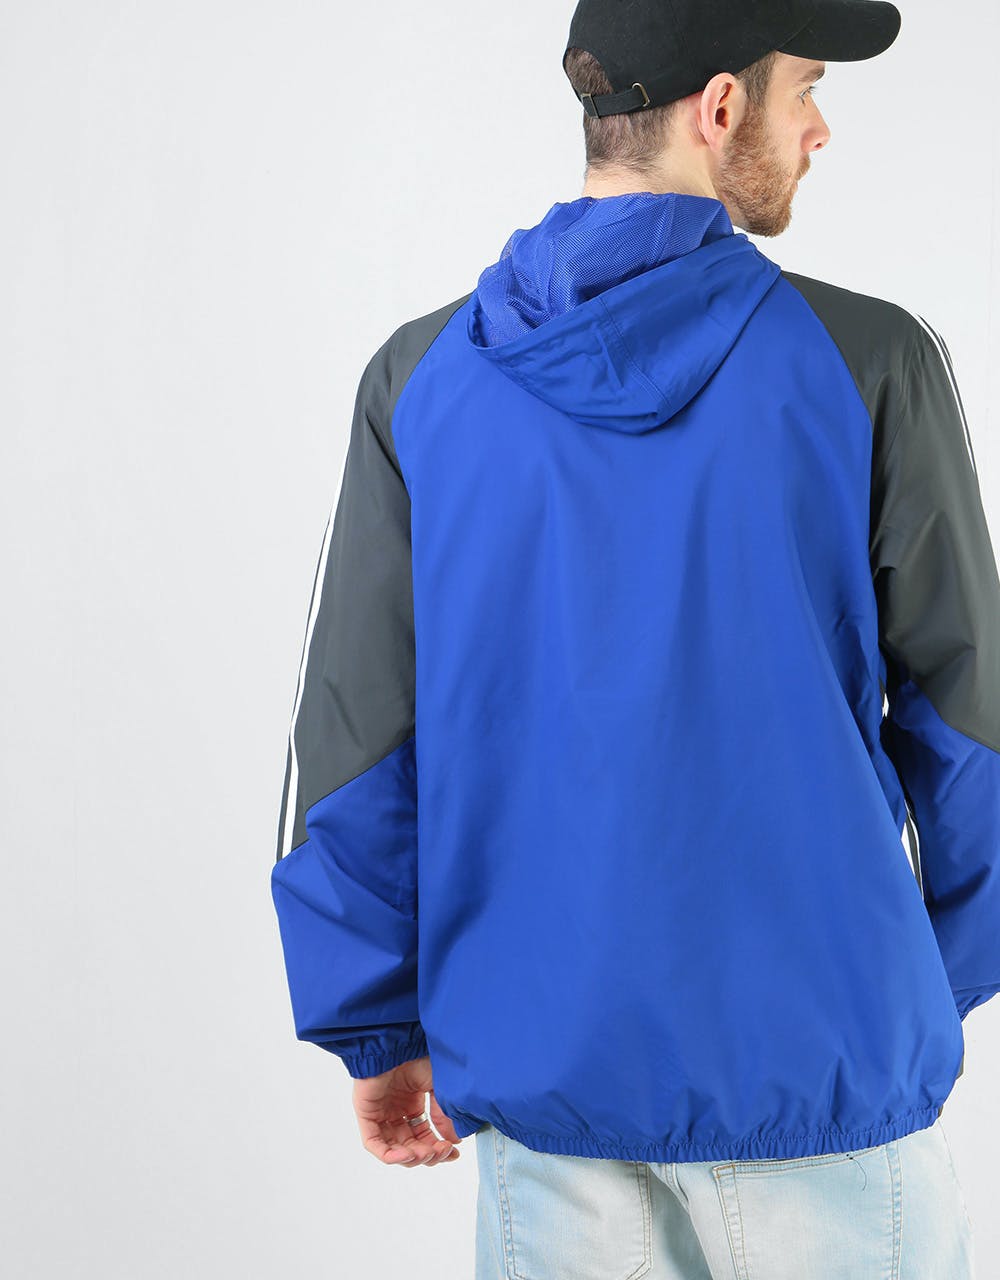 Adidas Insley Jacket - Active Blue/Dgh Solid Grey/White